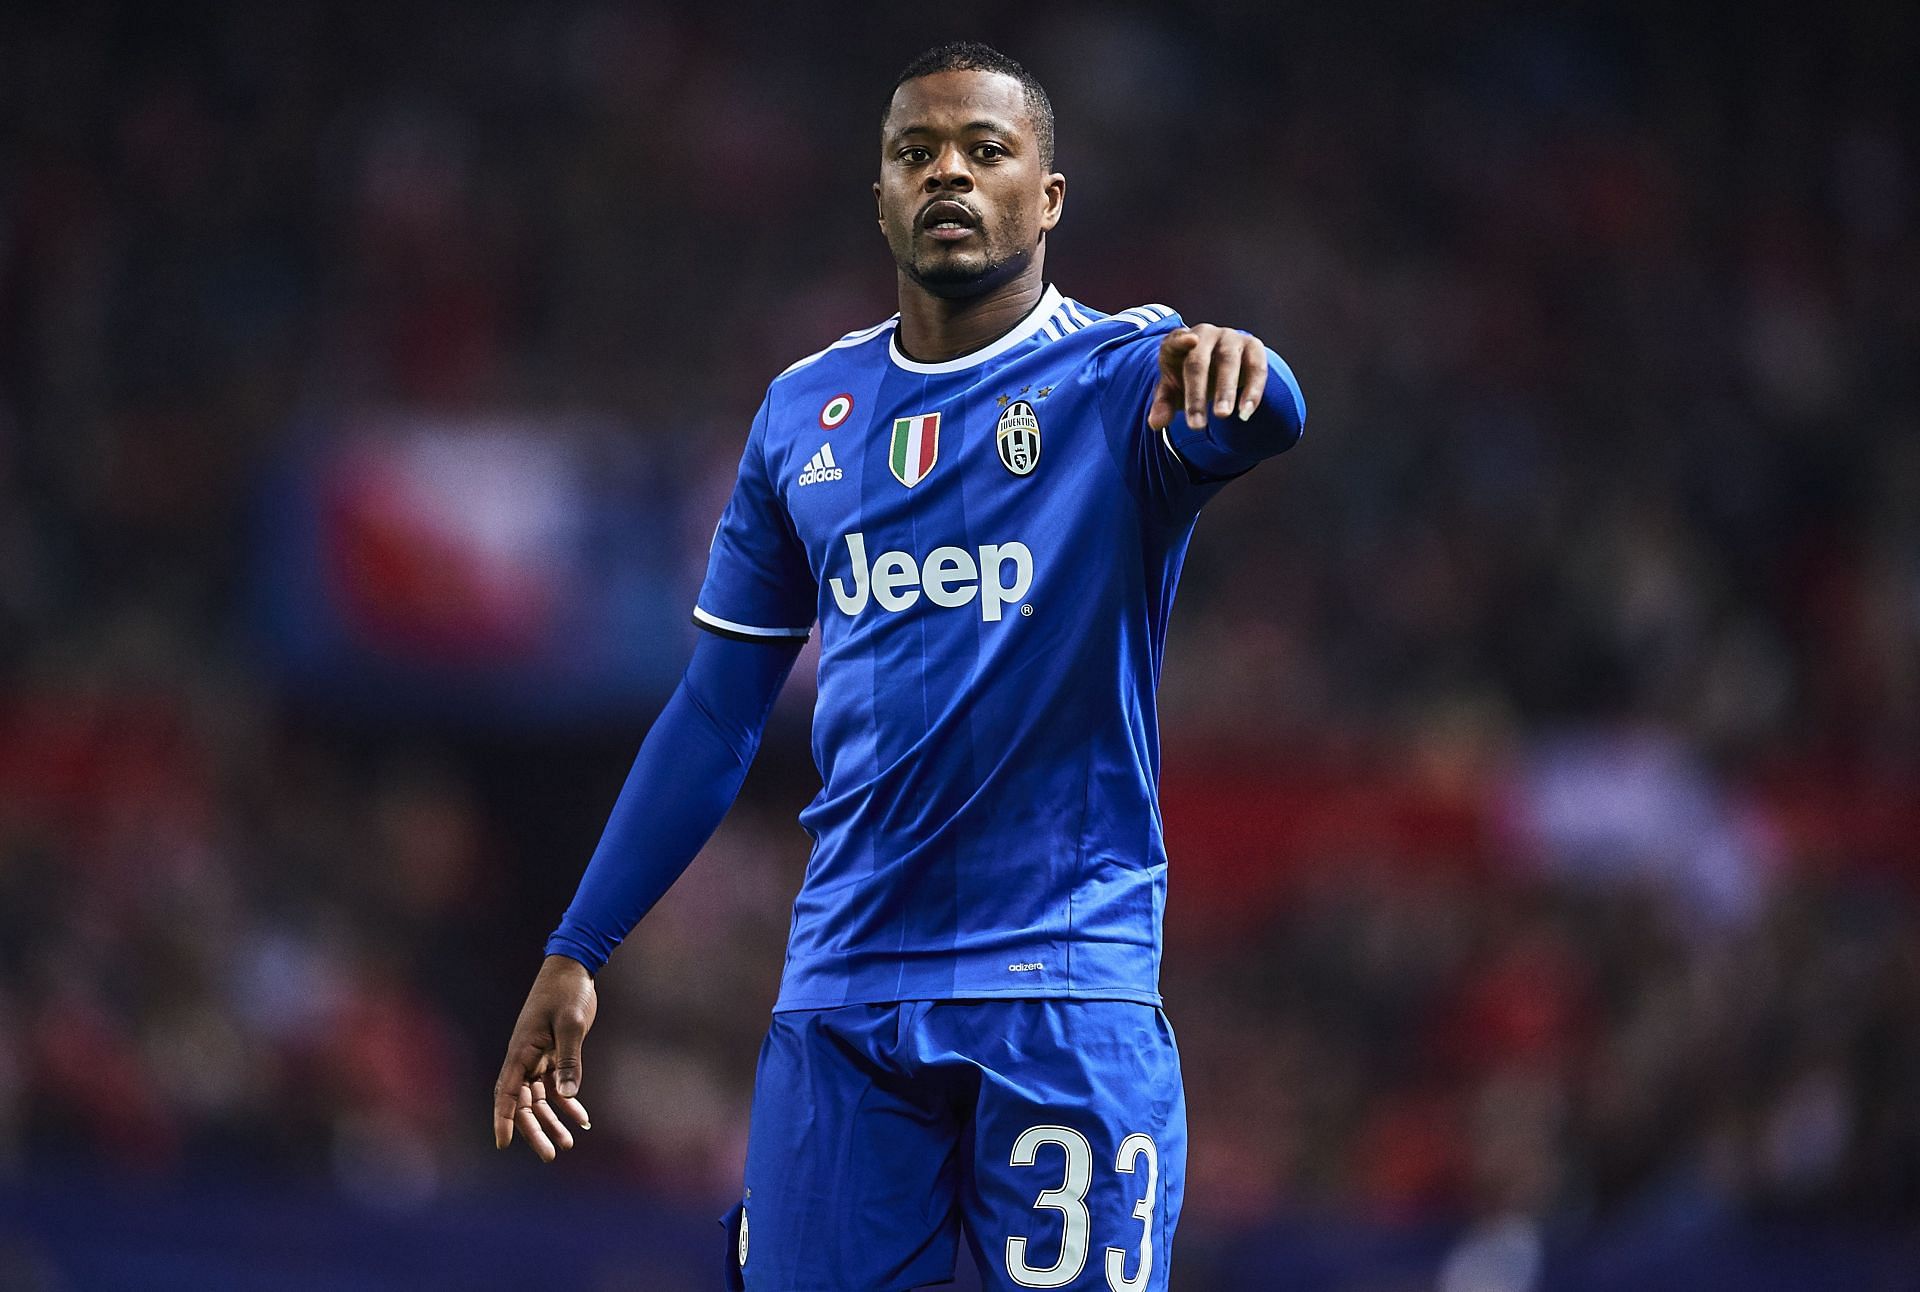 Patrice Evra was a world-class player.